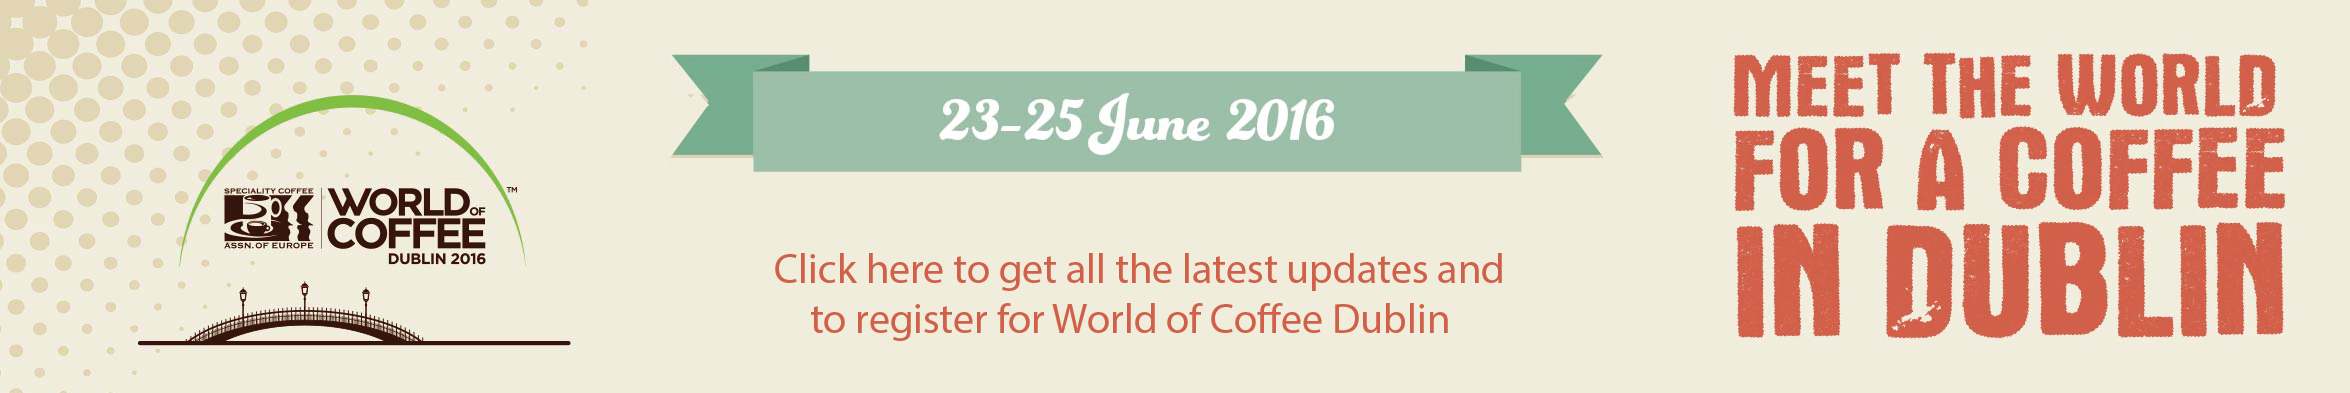 World-of-Coffee-Banner-Register-here